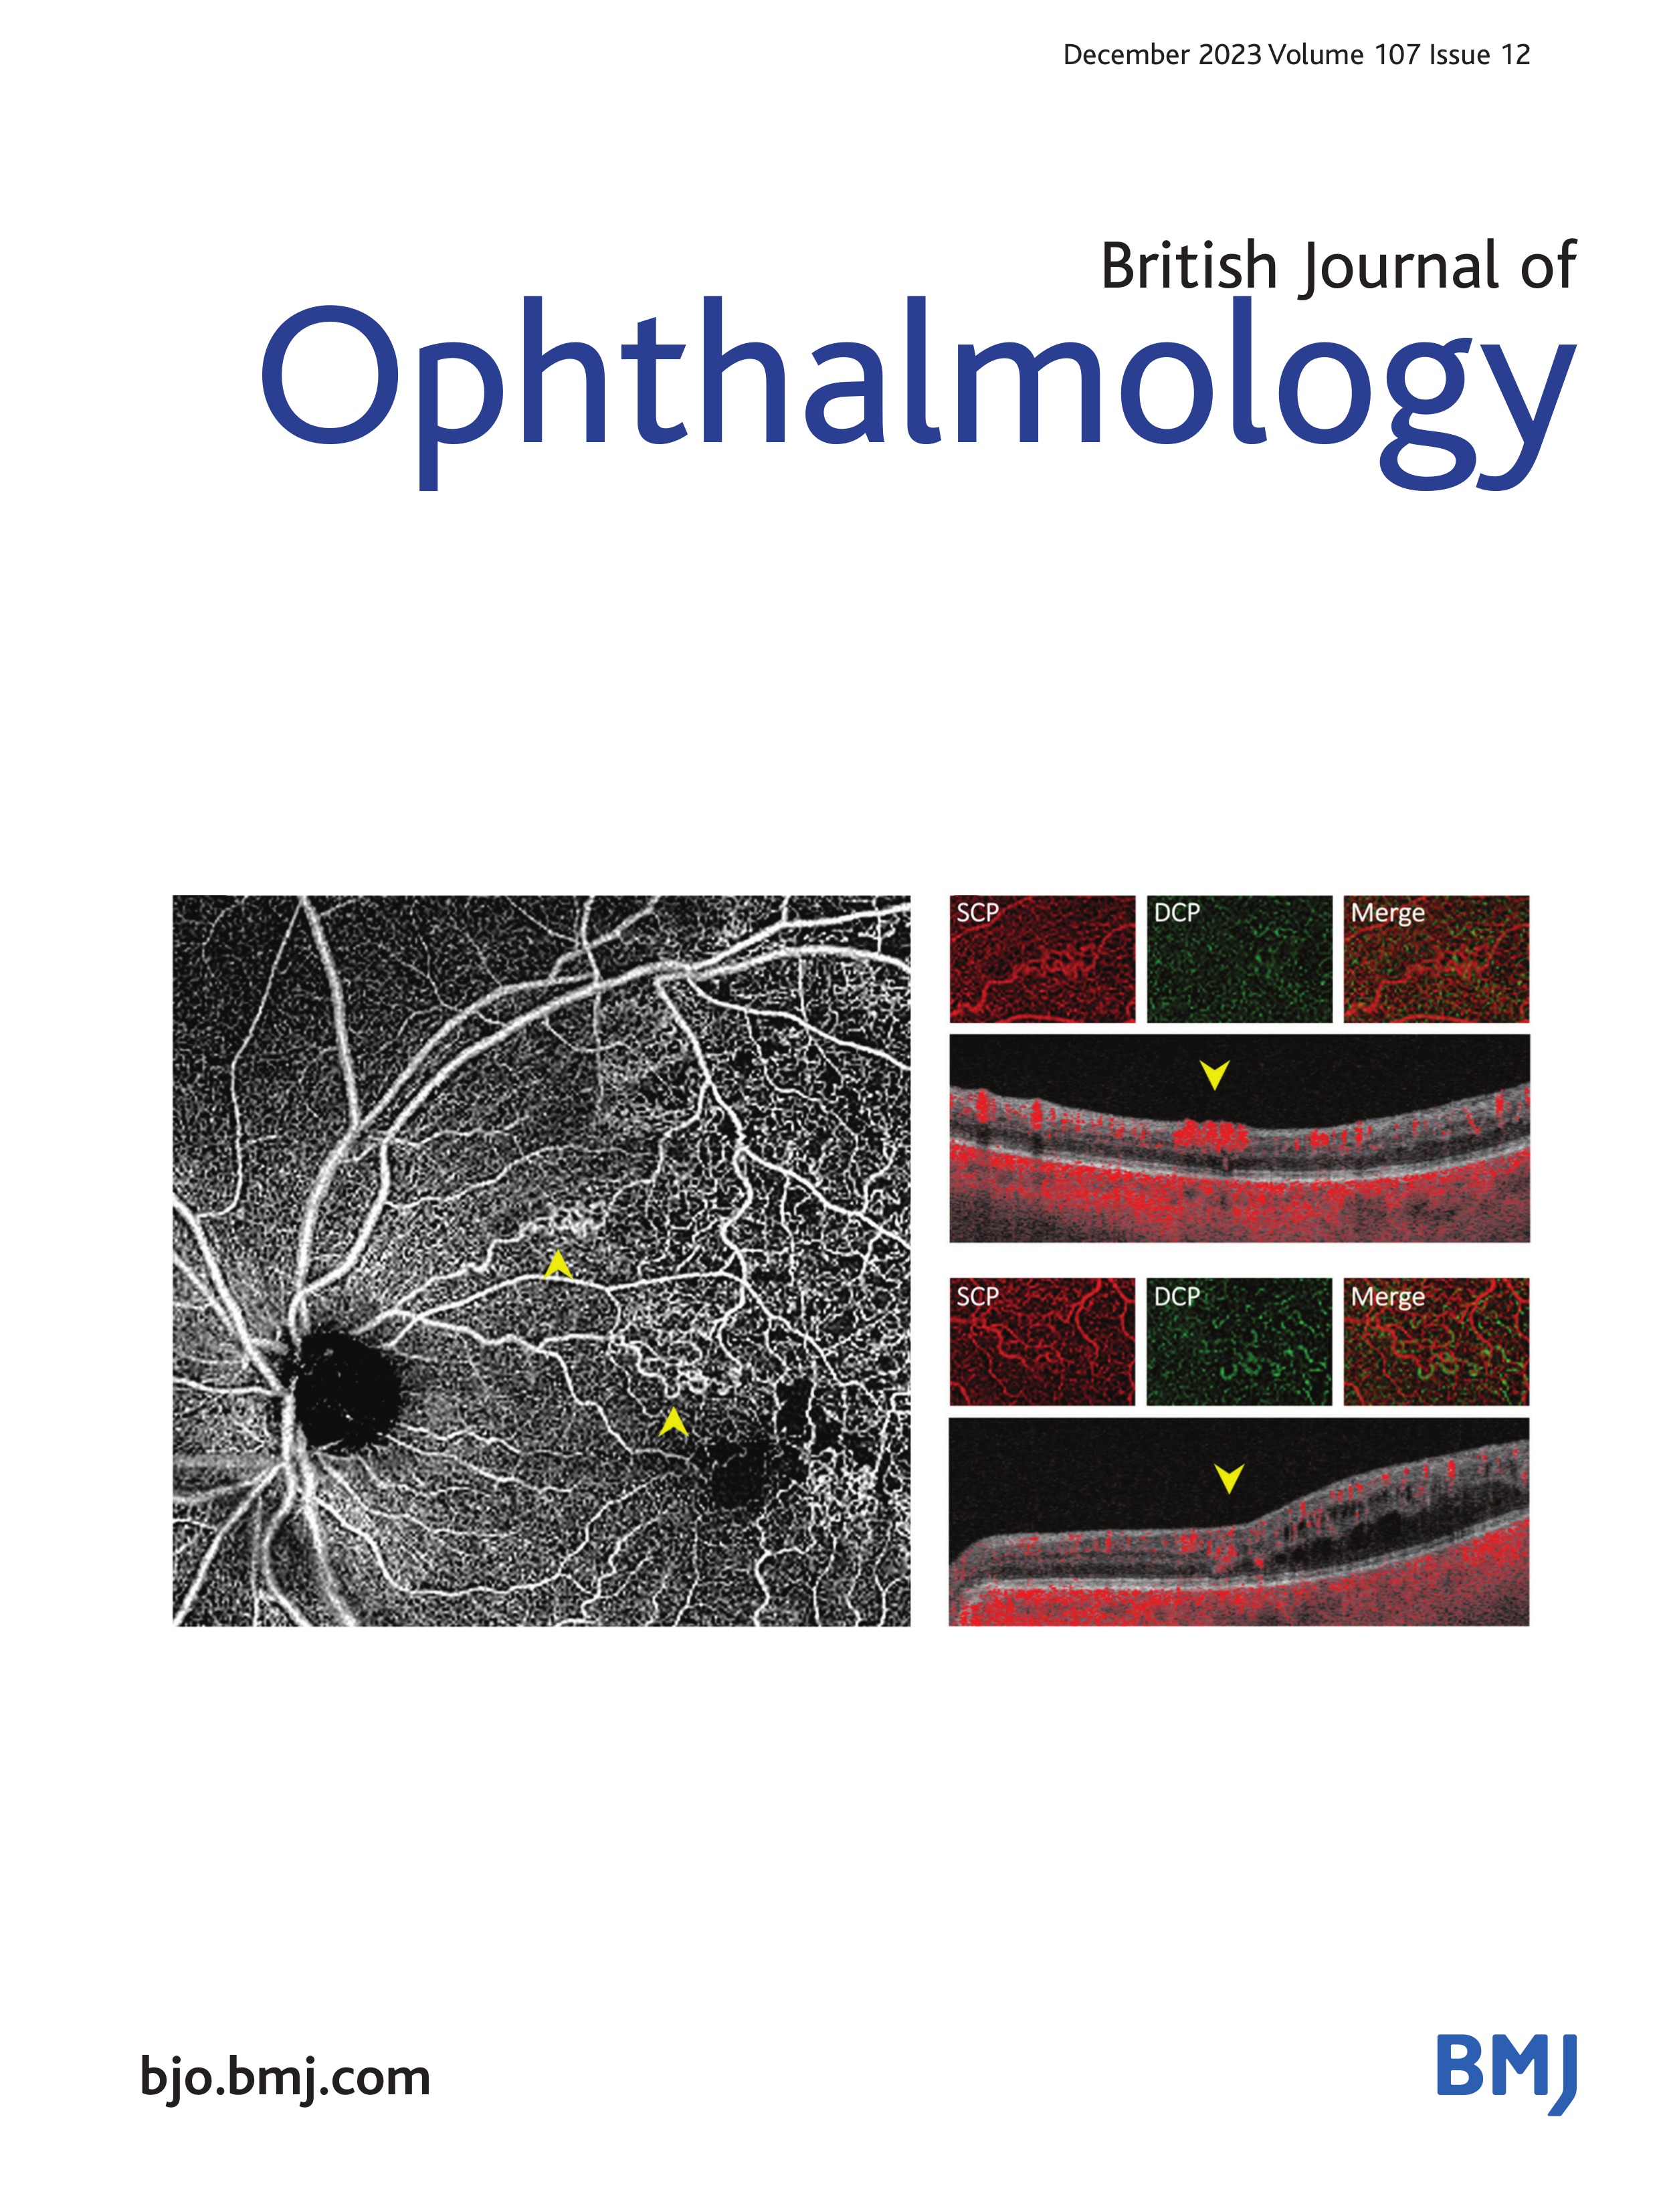 Risk factors for corneal ulcers: a population-based matched case-control study in Nepal